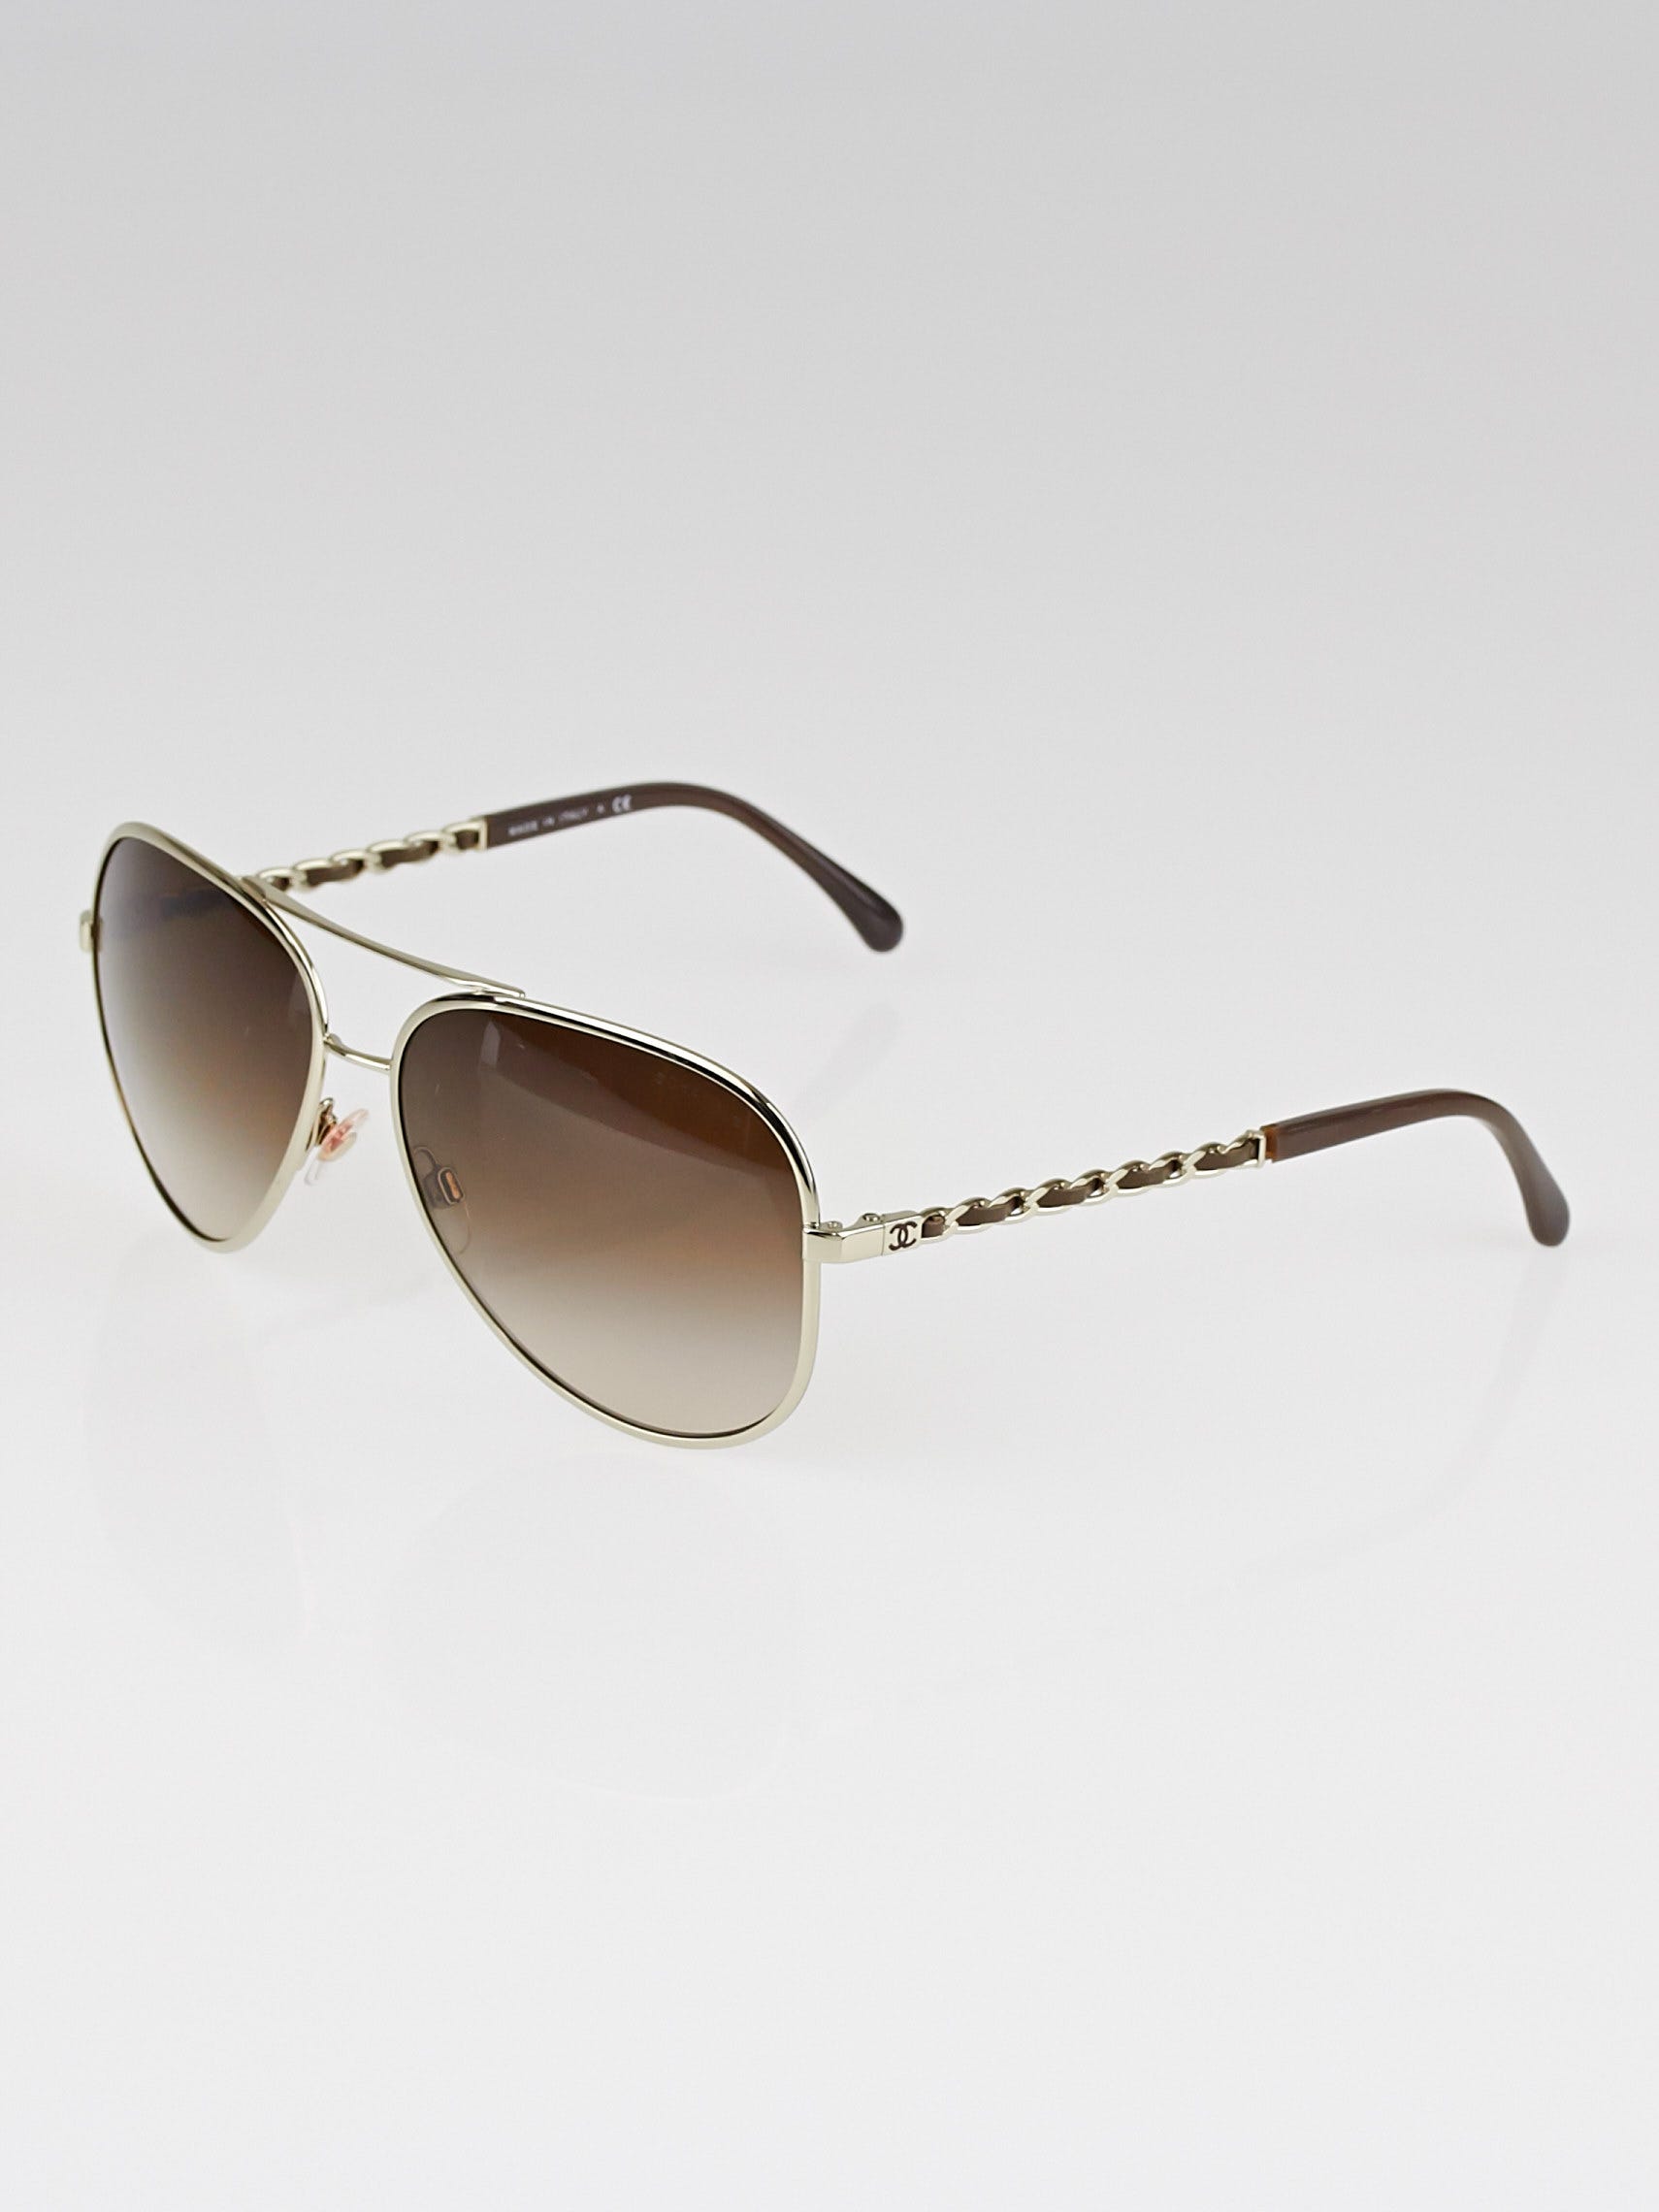 chanel sunglasses gold chain used